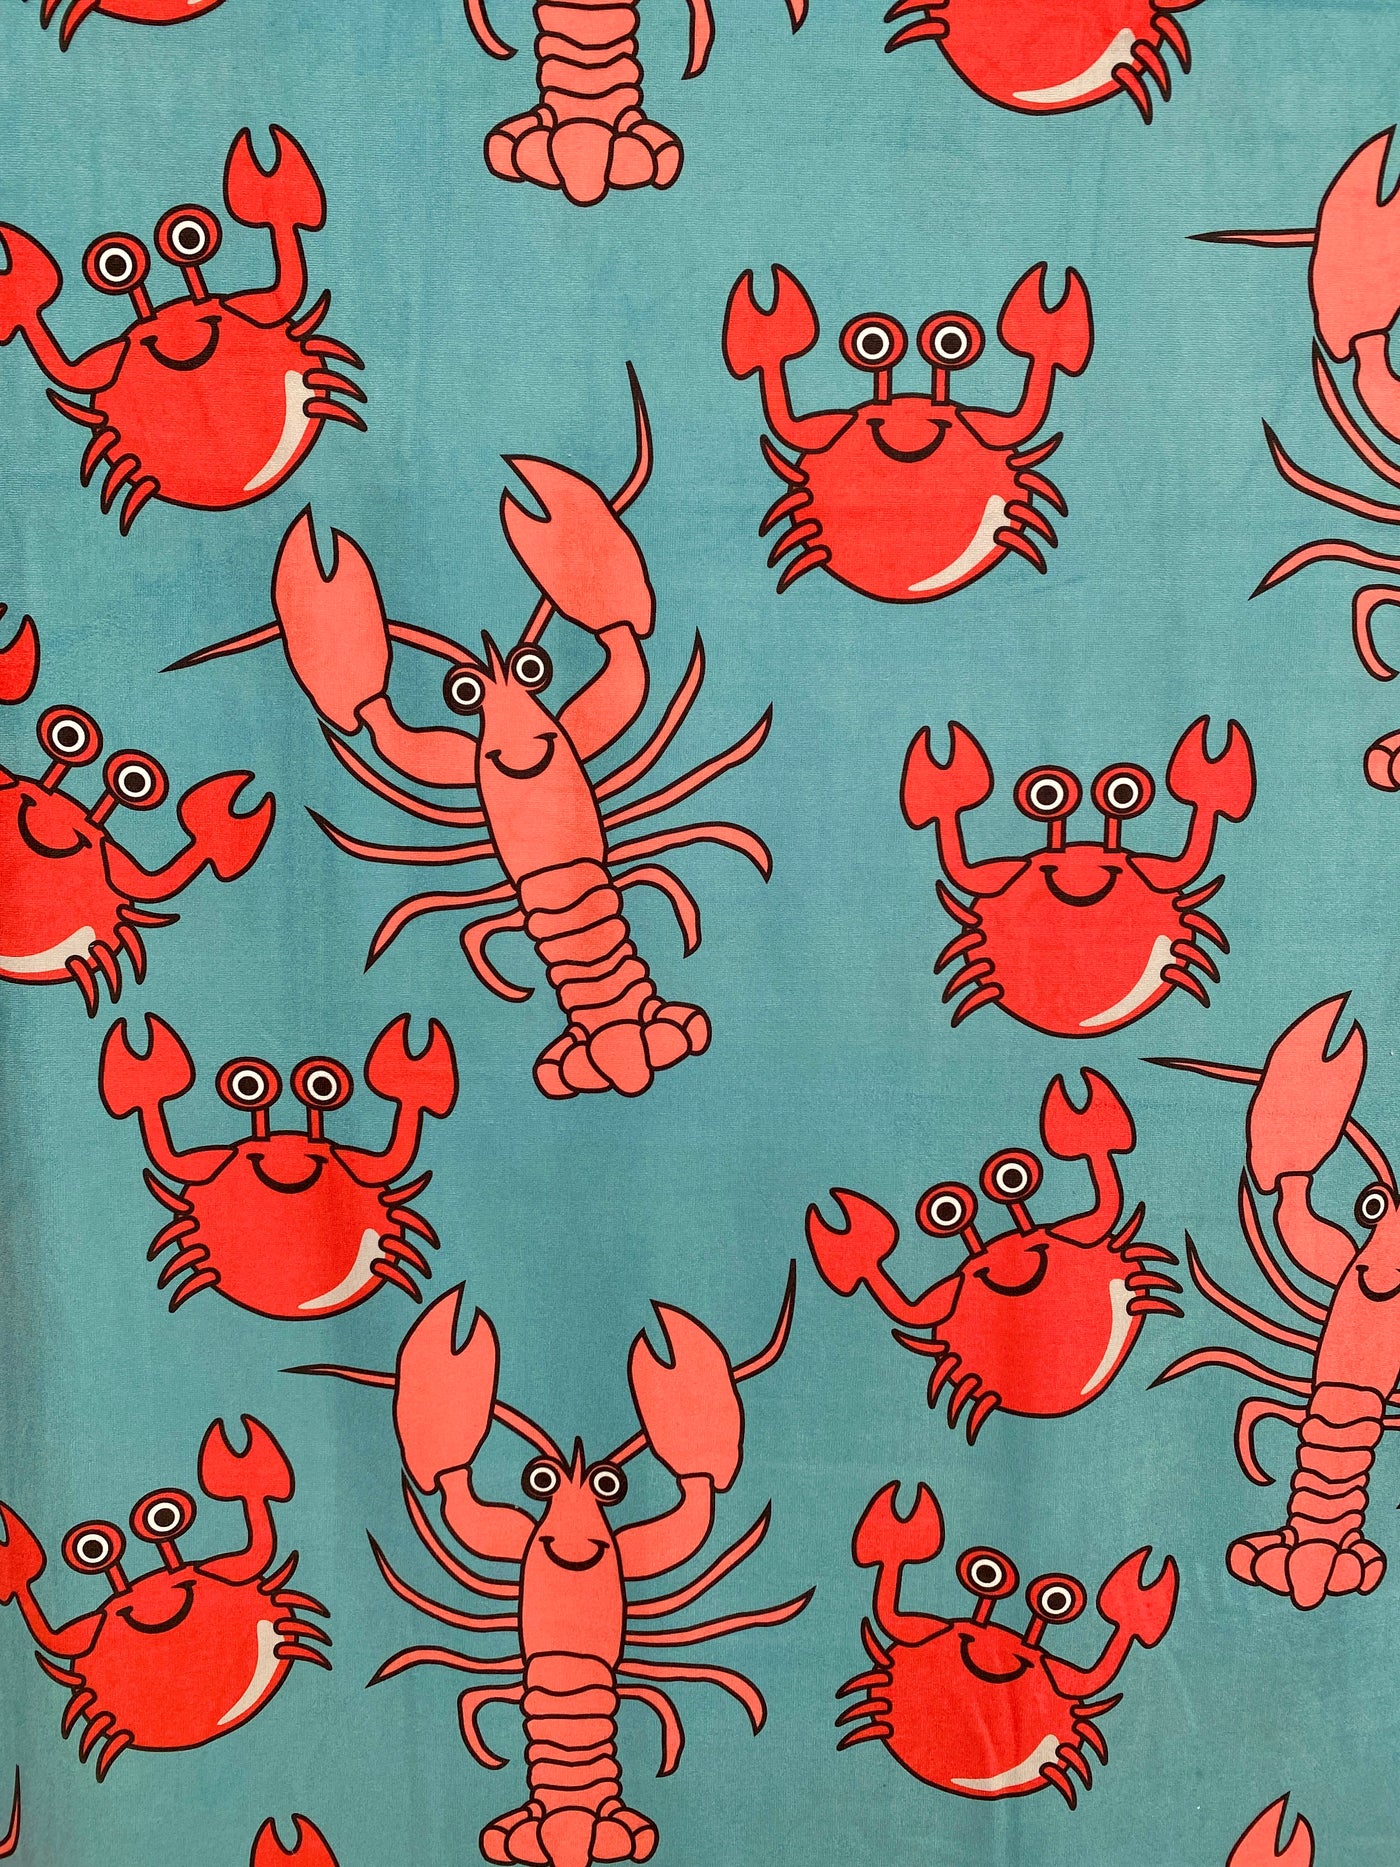 Giant Towel: Lobsters and crabs